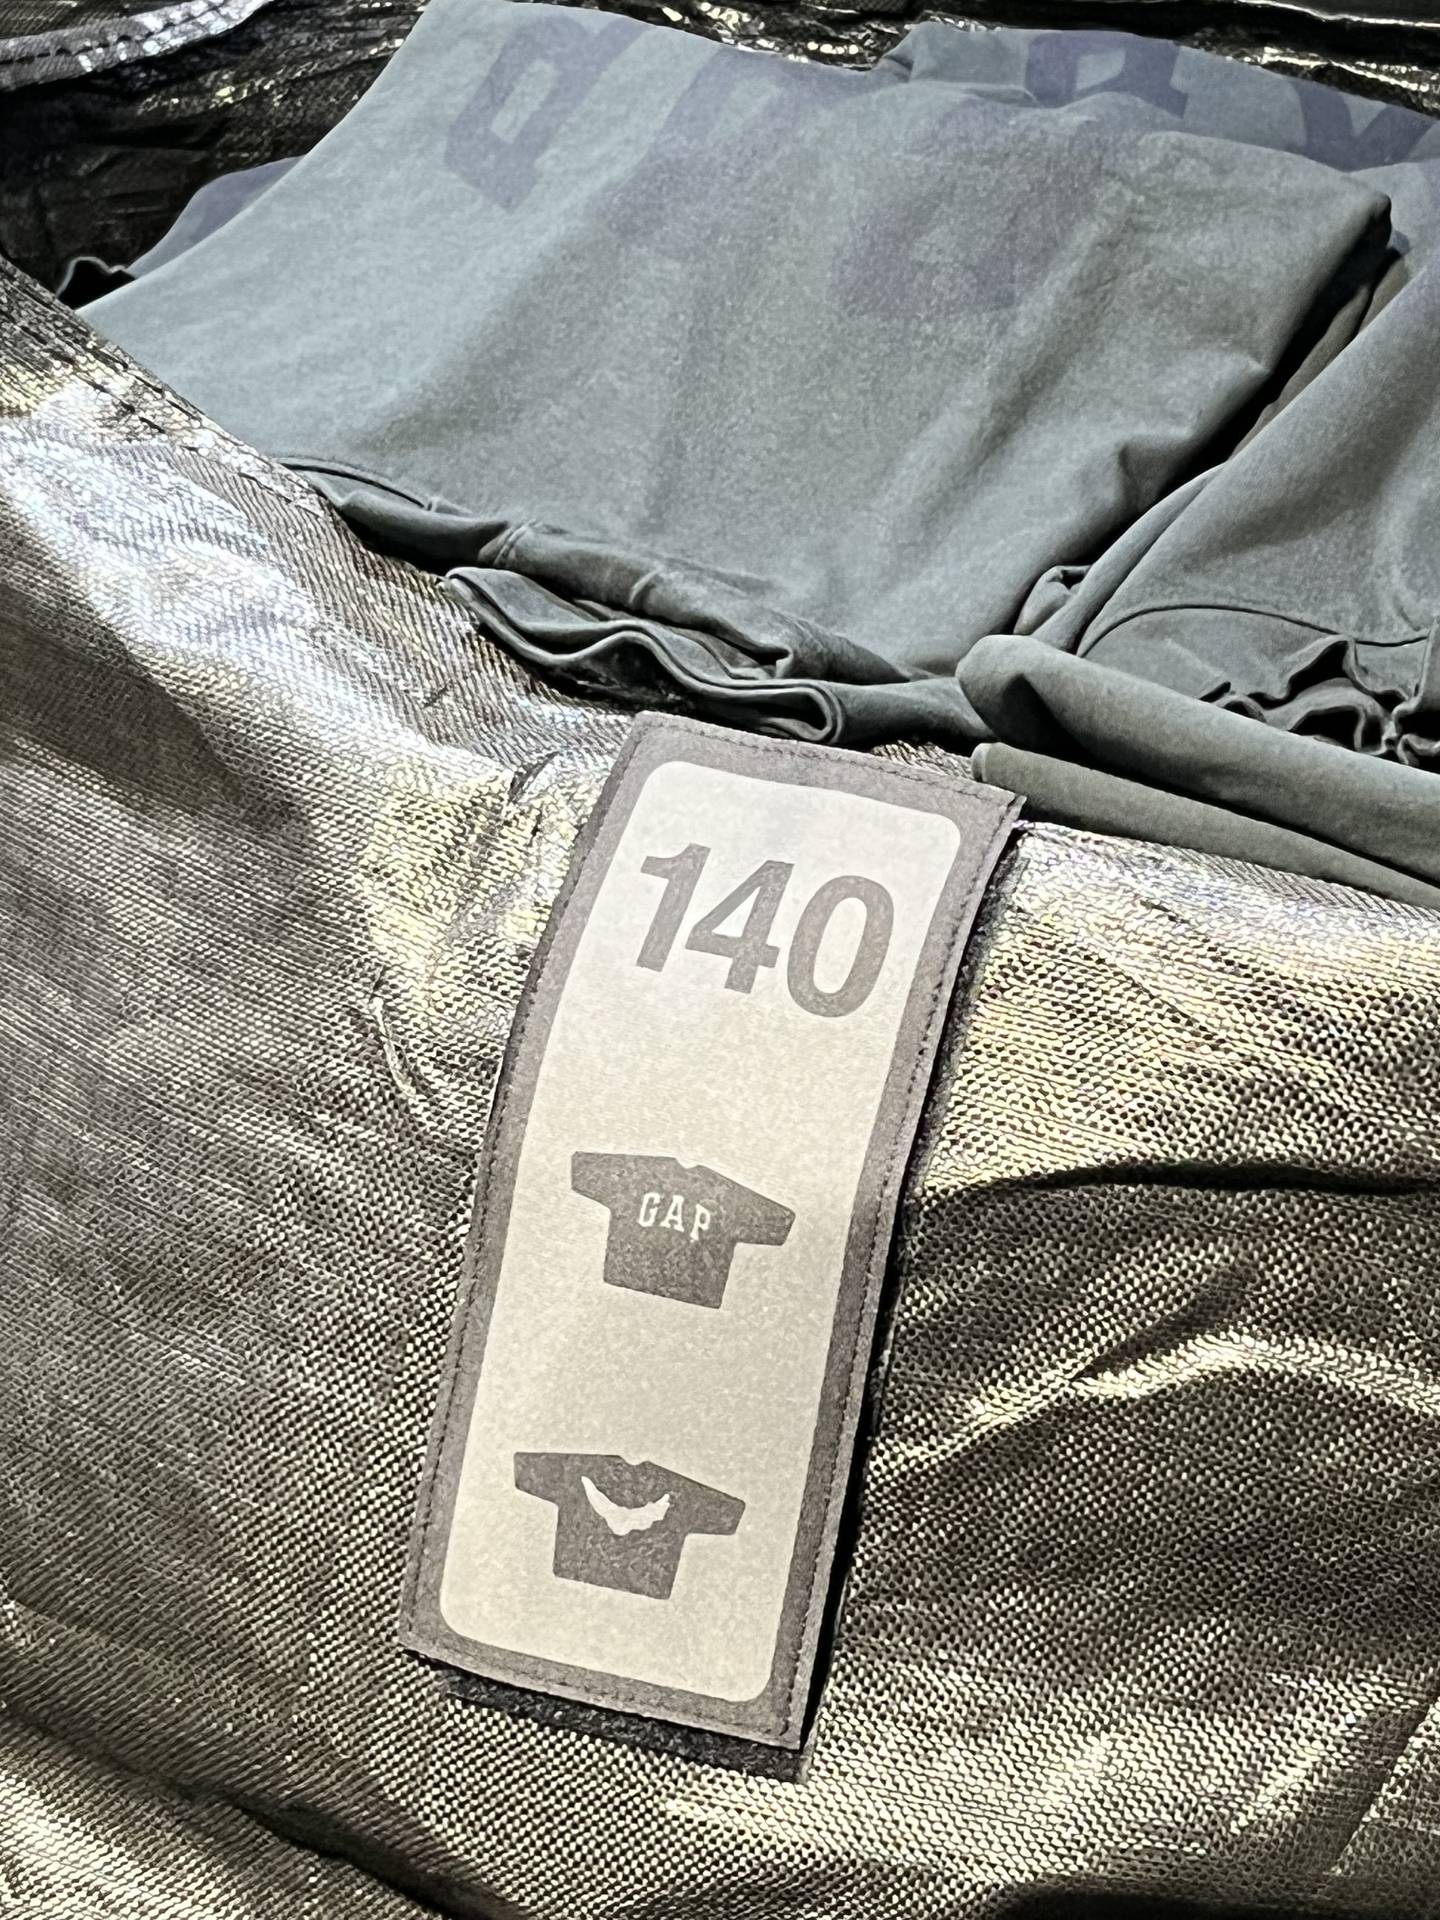 Shirts sit folded in one of the black plastic bags used for the Yeezy Gap experience.